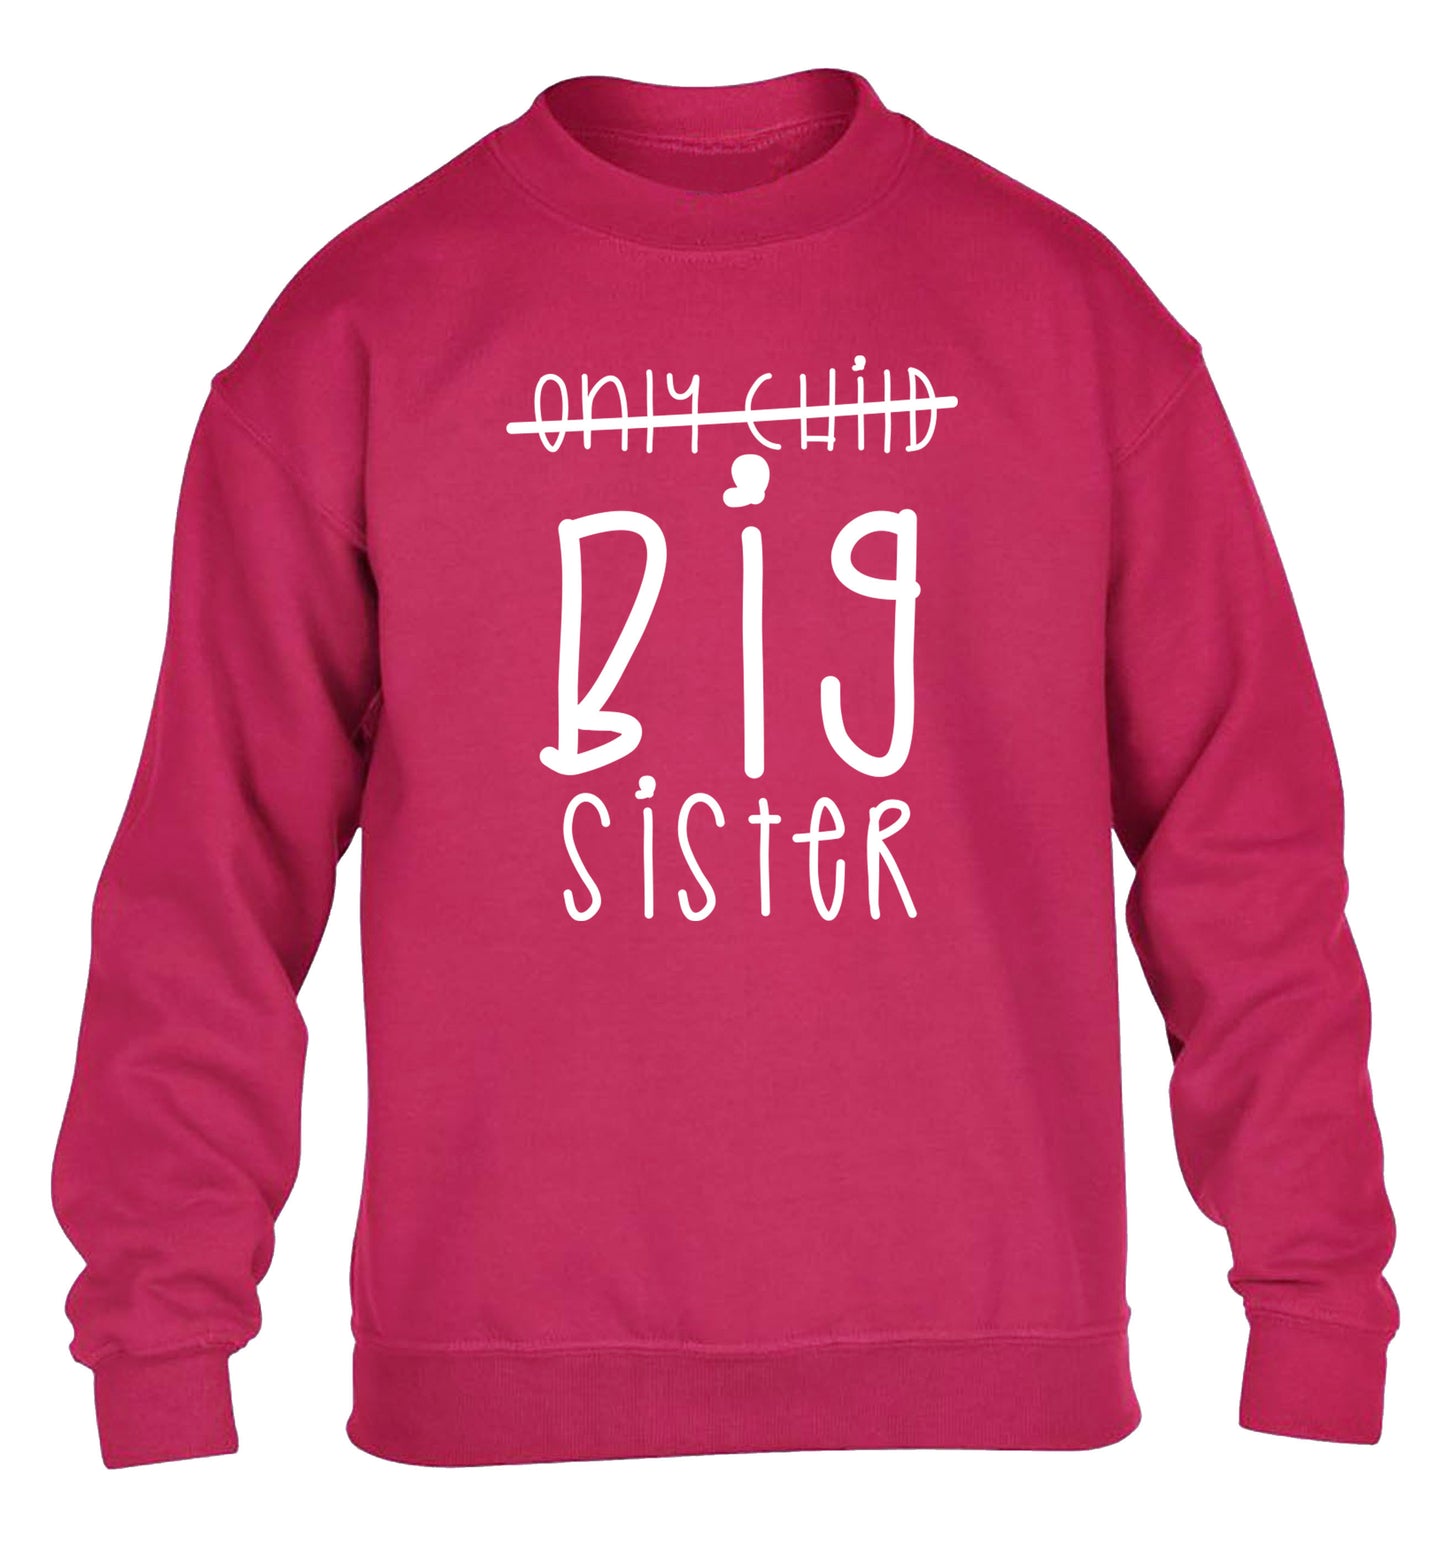 Only child big sister children's pink sweater 12-14 Years